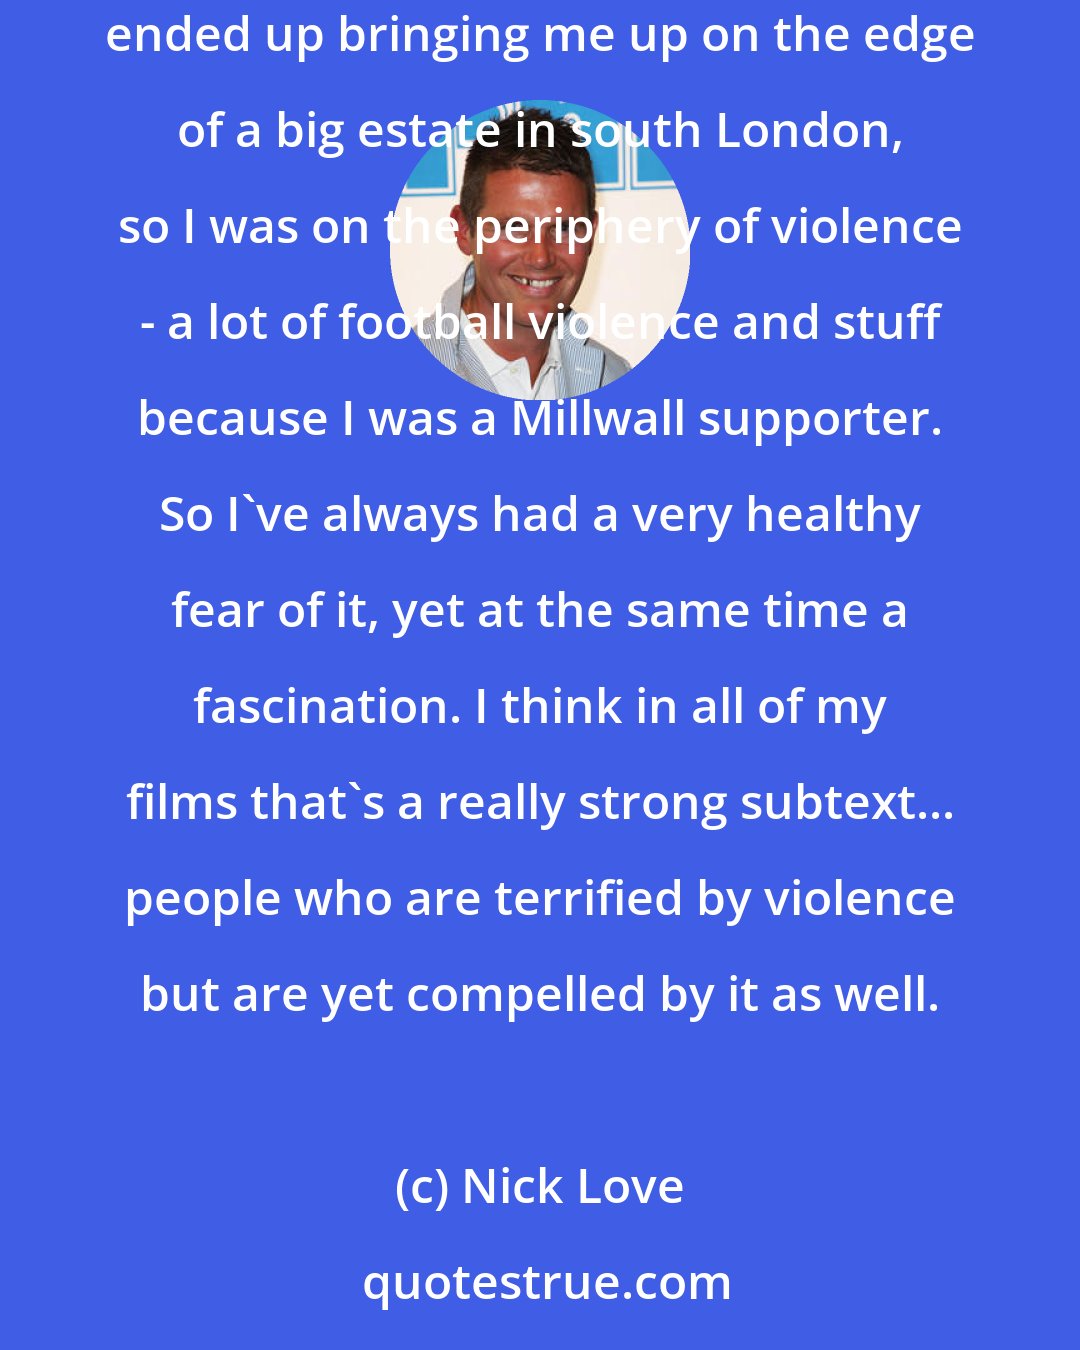 Nick Love: I've always been terrified of violence which is probably why I keep making violent films - I'm trying to exorcise some demons or something. My mum ended up bringing me up on the edge of a big estate in south London, so I was on the periphery of violence - a lot of football violence and stuff because I was a Millwall supporter. So I've always had a very healthy fear of it, yet at the same time a fascination. I think in all of my films that's a really strong subtext... people who are terrified by violence but are yet compelled by it as well.